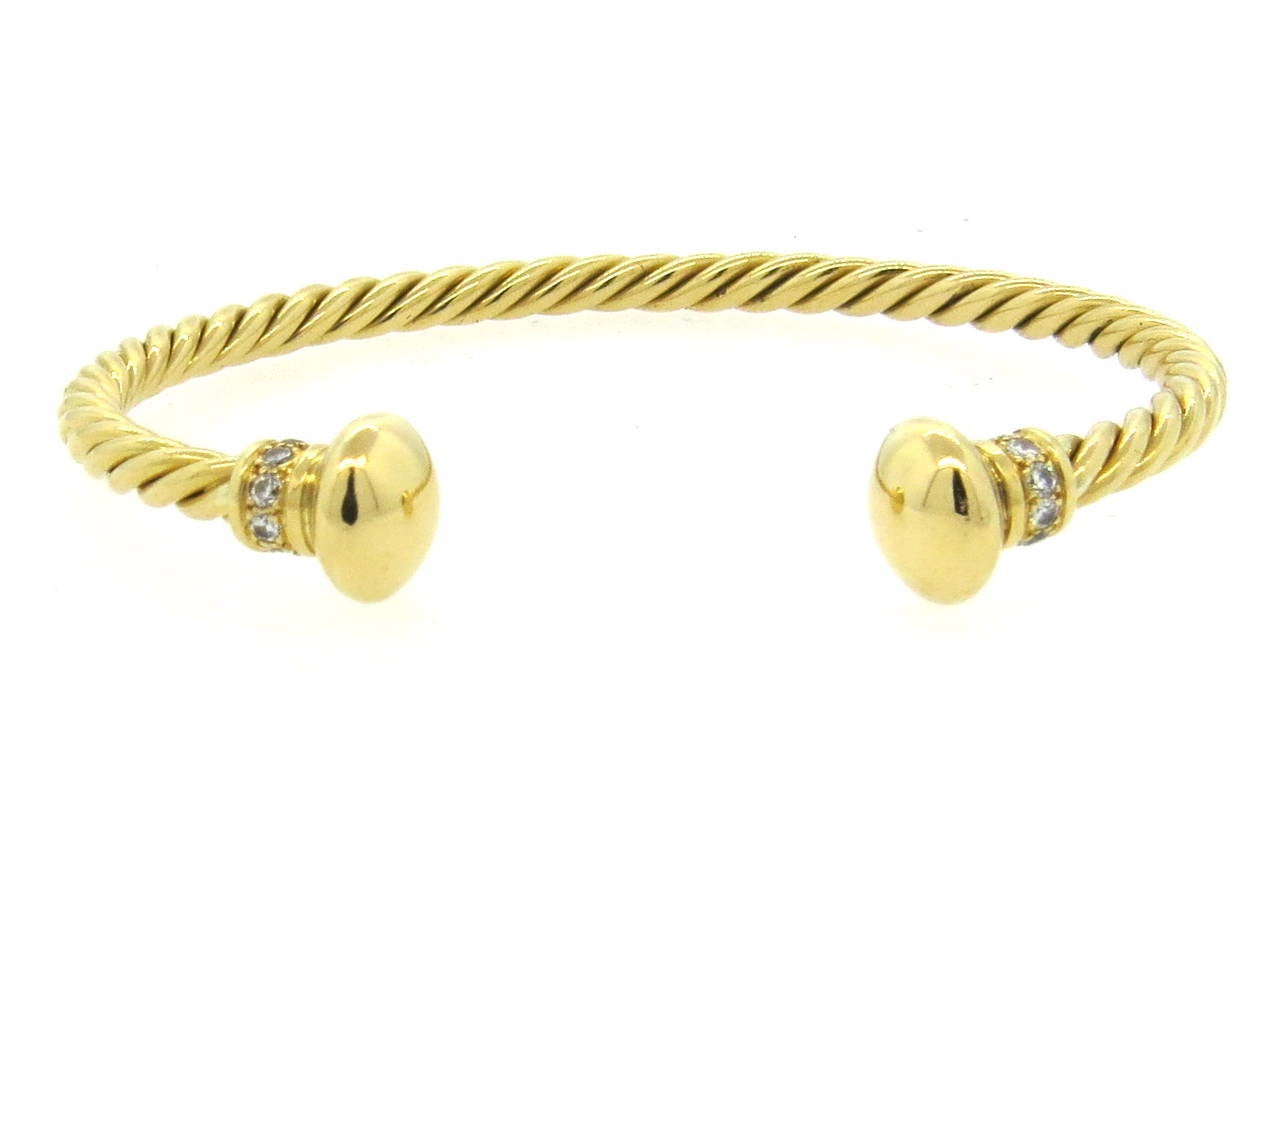 18k gold cuff bracelet, crafted by Bulgari, decorated with approx. 0.24ctw in G/VS diamonds. Bracelet will fit up to 7